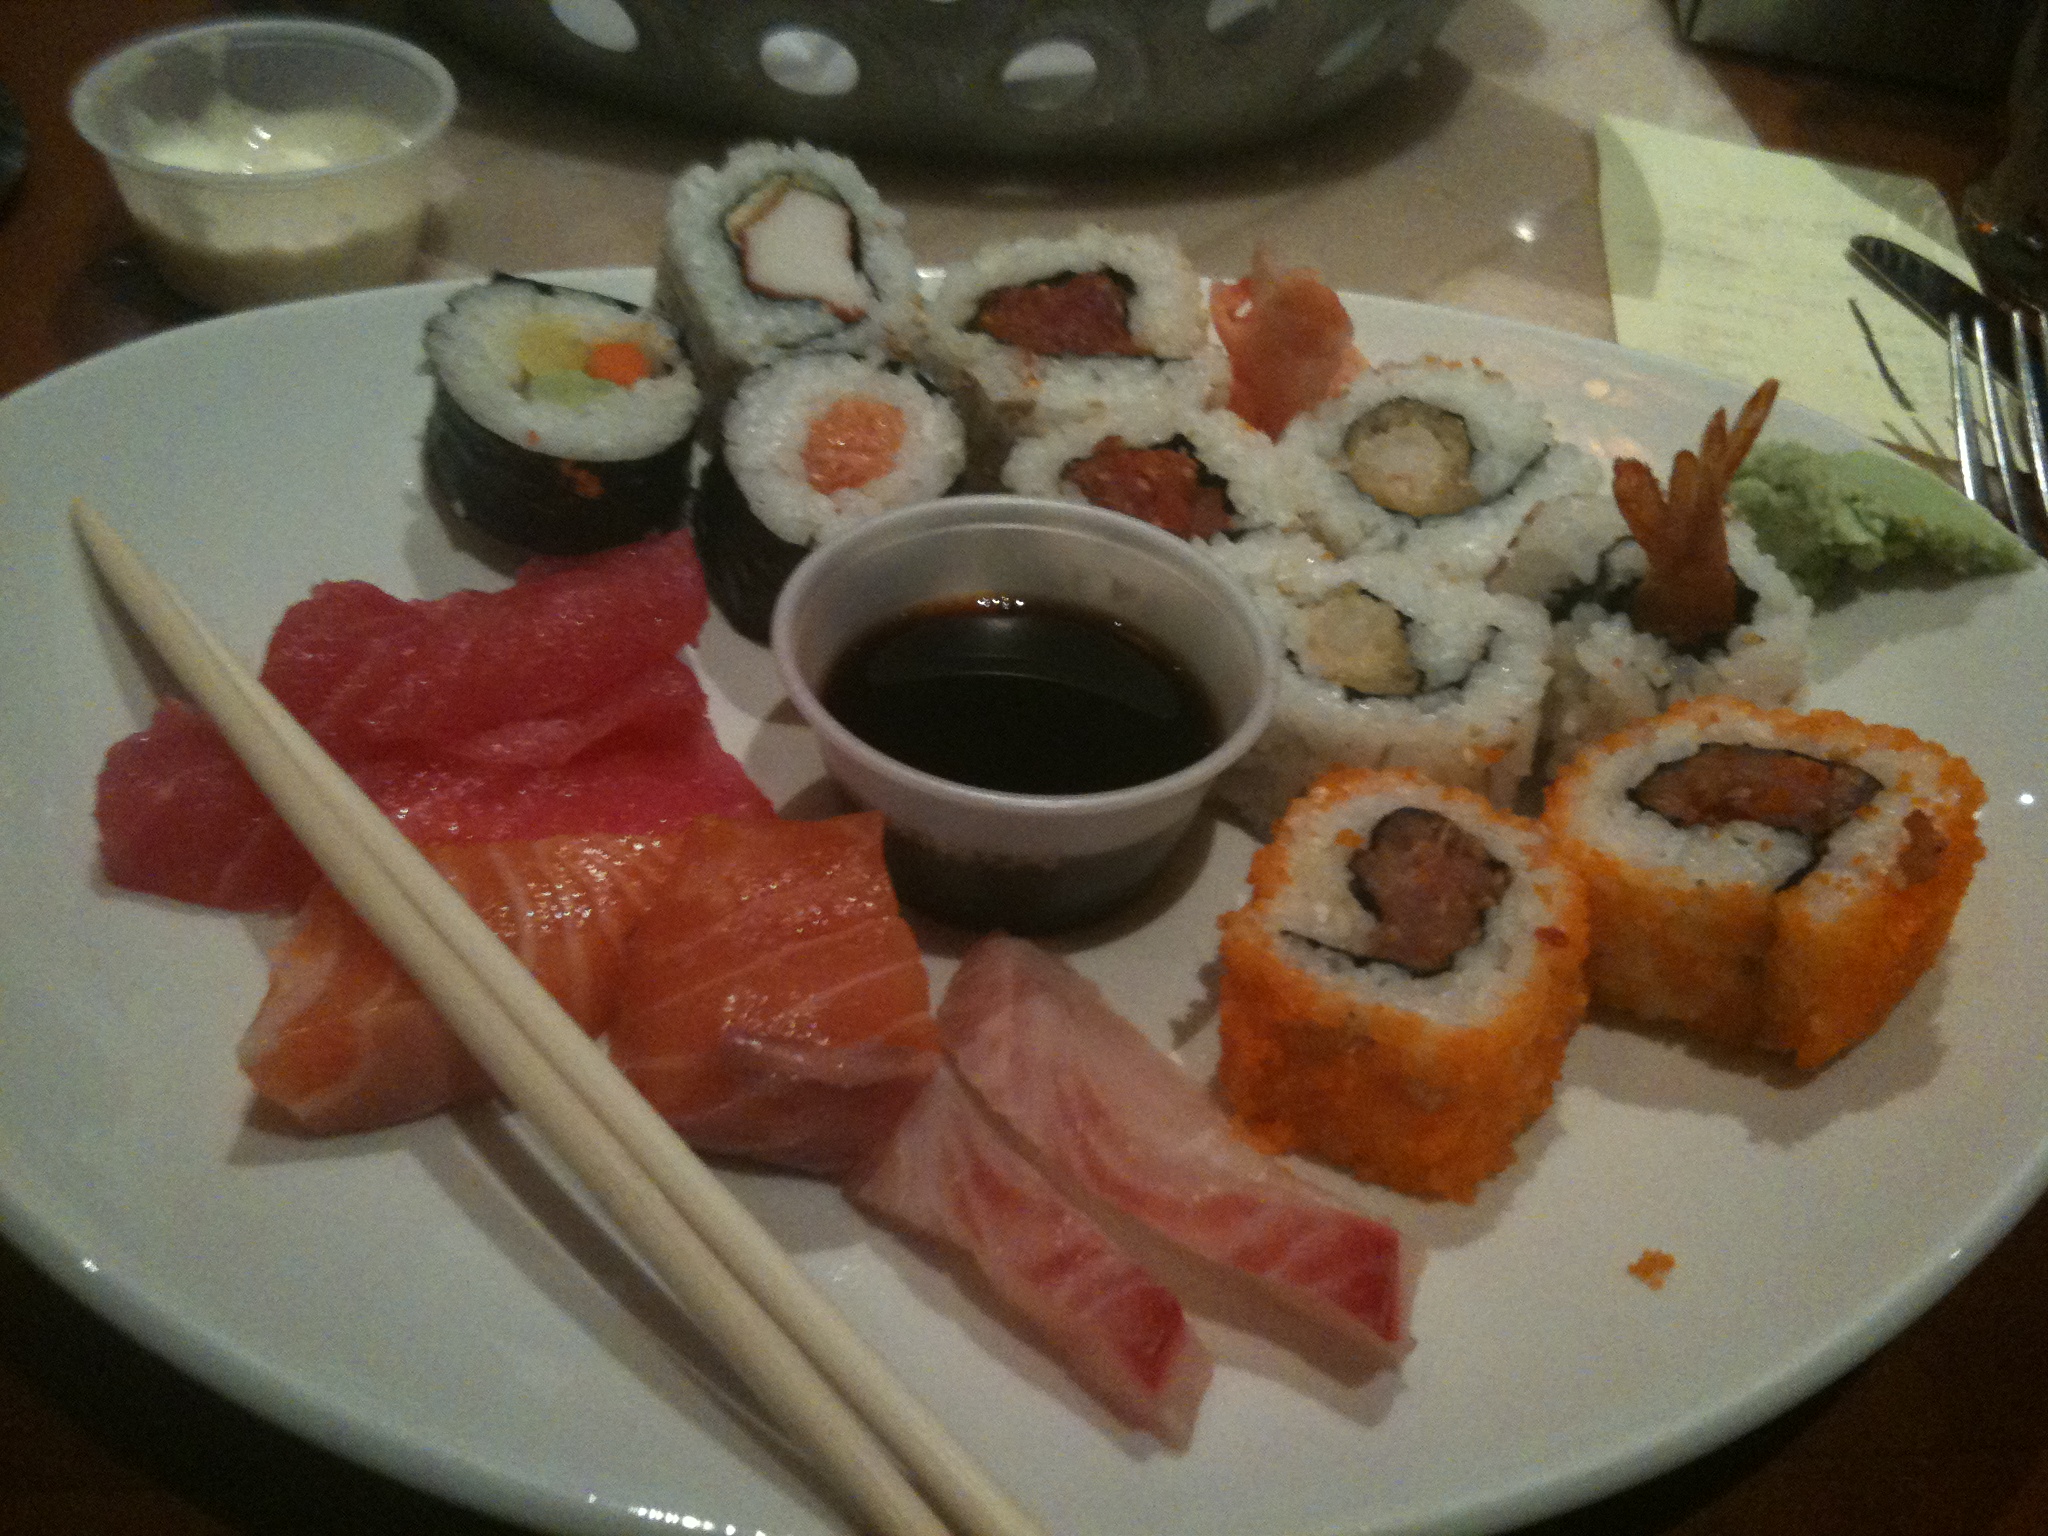 sushi and rolls sitting on a white plate with chopsticks